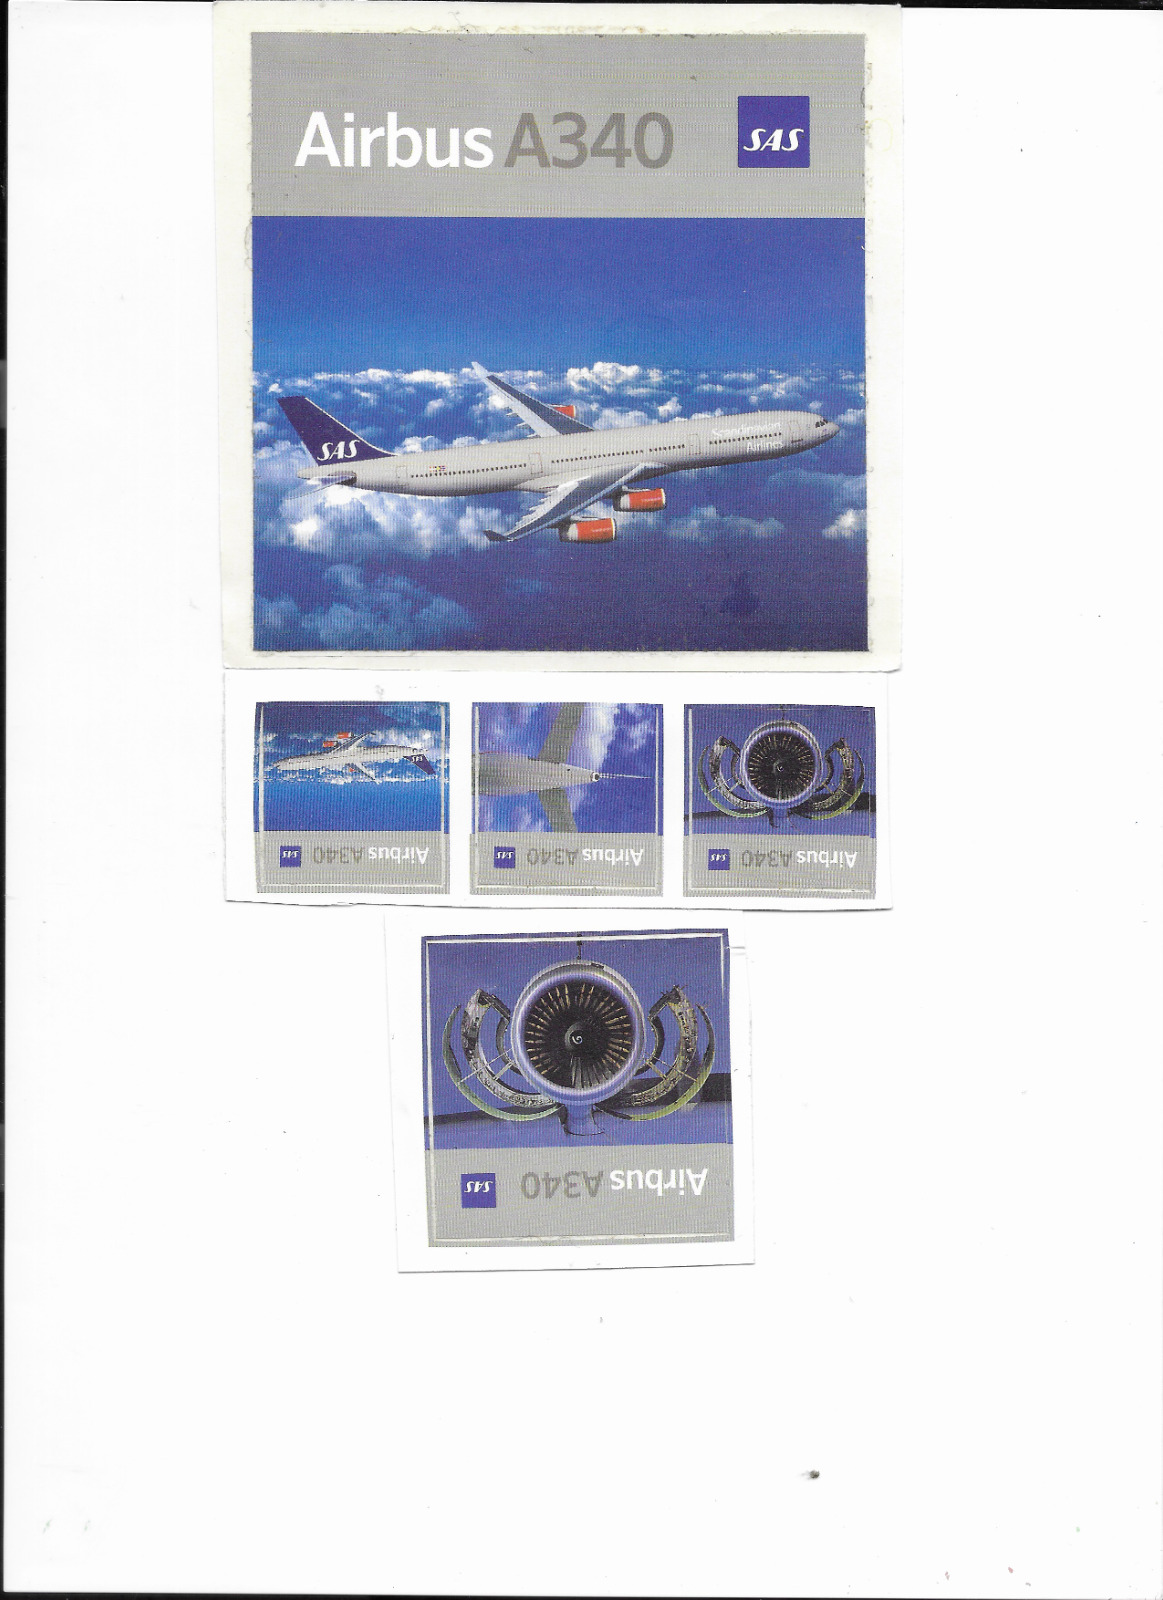 SAS Scandinavian Airlines 5 AIRBUS A340 Stickers, Airplane, Tail, Engines